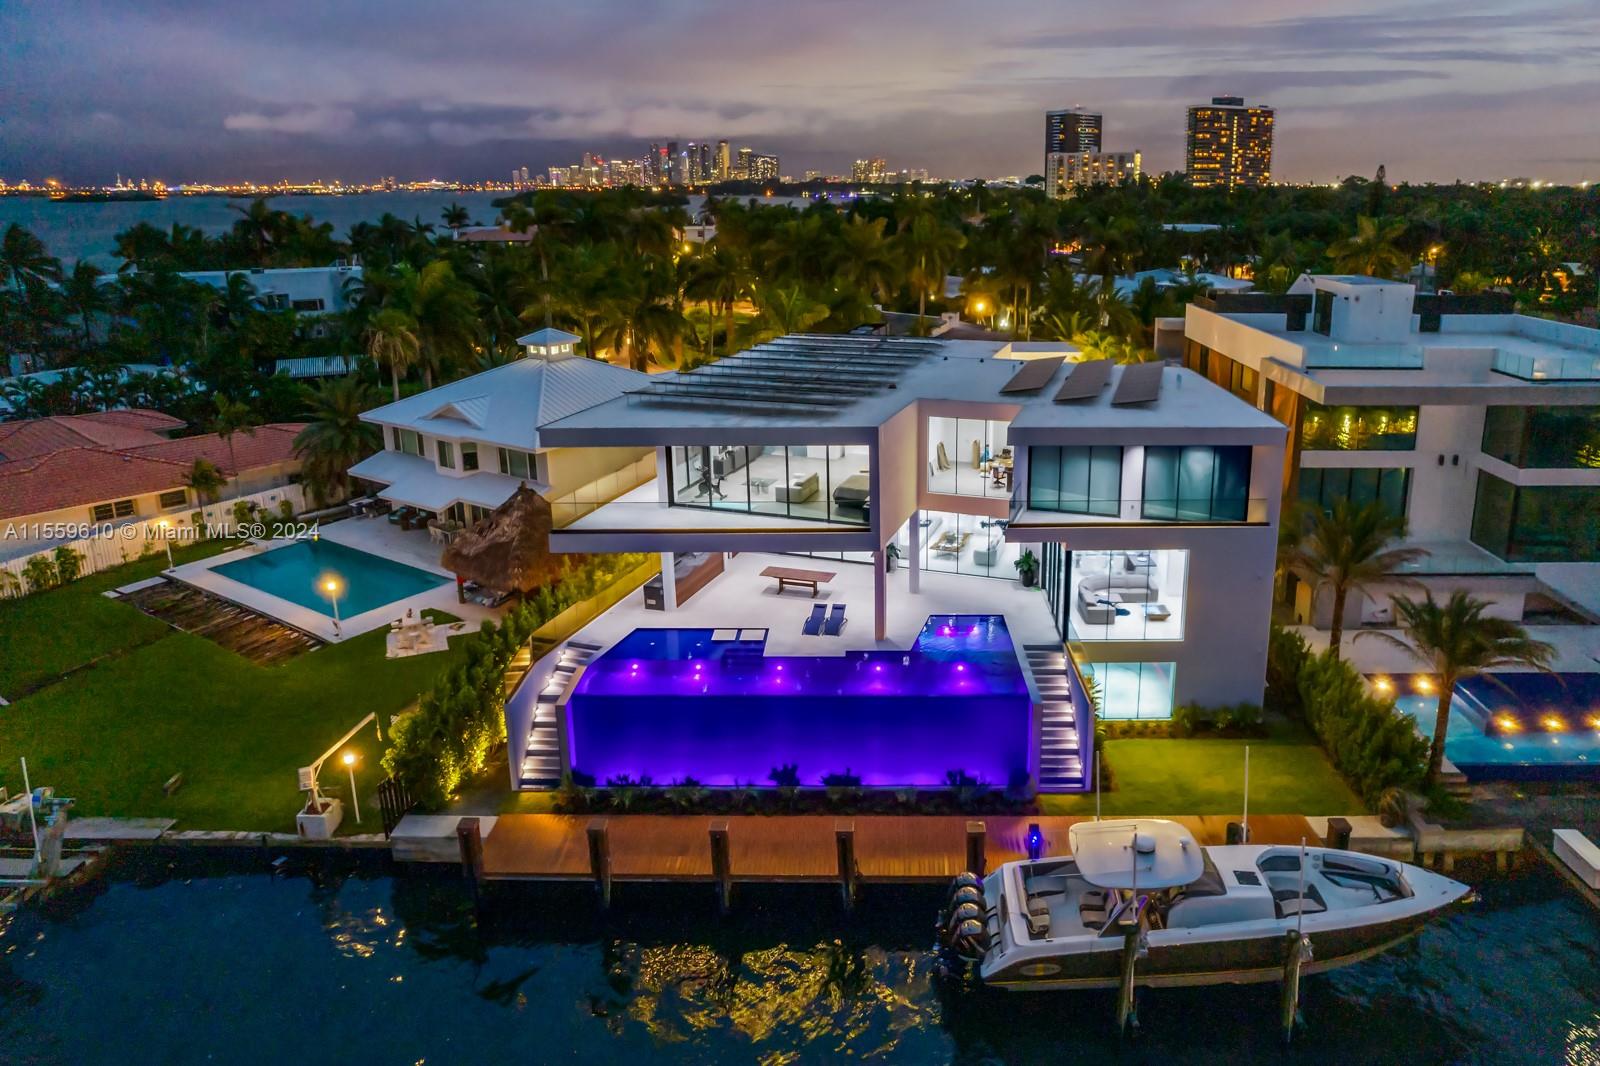 Stunning Bay/Canal Contemporary Residence- 100+ ft on deep water - New Construction (total of 12,200 SF under A/C).  Loaded with ultra luxury finishes and very little use - 35KM solar electric generator w/six Tesla power walls & Travertine exterior walls.  All custom lighting & sound throughout.  Unique glass elevator to all three levels.  Generous sized rooms and large closets.  Art Gallery, Office-Library, amazing 12 car garage, play room & wine cellar.  Breathtaking views of the Open Bay, City lights and tropical gardens from all rooms.  Huge covered Patio + Summer Kitchen w/50ft infinity edge pool.  Full dock & Boat Lift. Double gated 24/7 Island in the heart of Miami.  Minutes to Design District, Beaches, Downtown Miami & Bal Harbour.  Owner Financing Available.